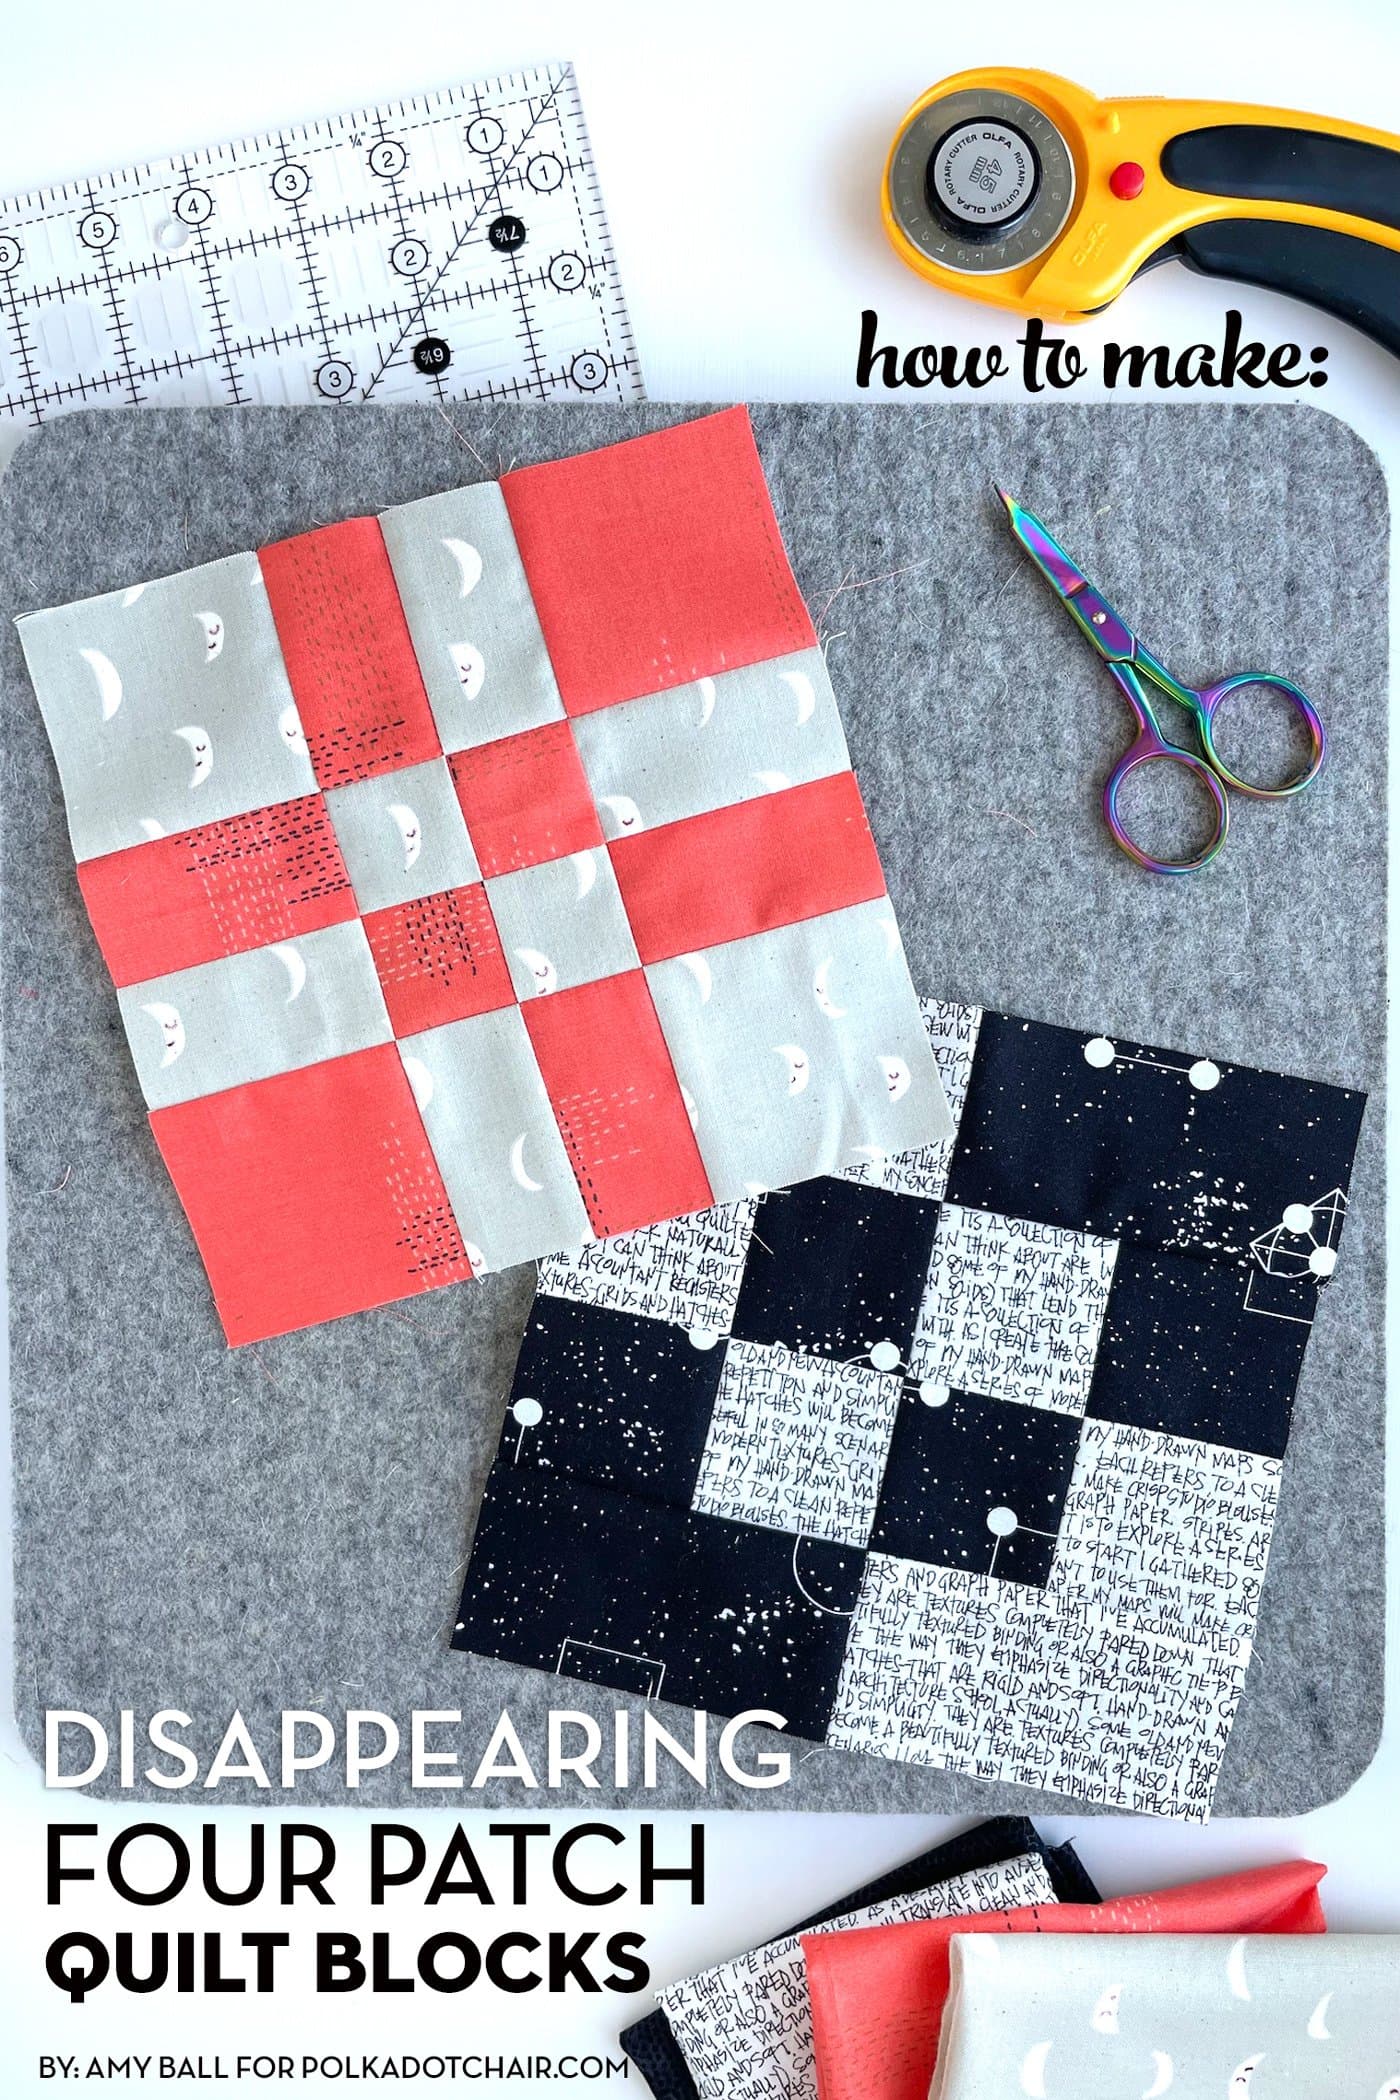 How to Make a Disappearing Four Patch Quilt Block